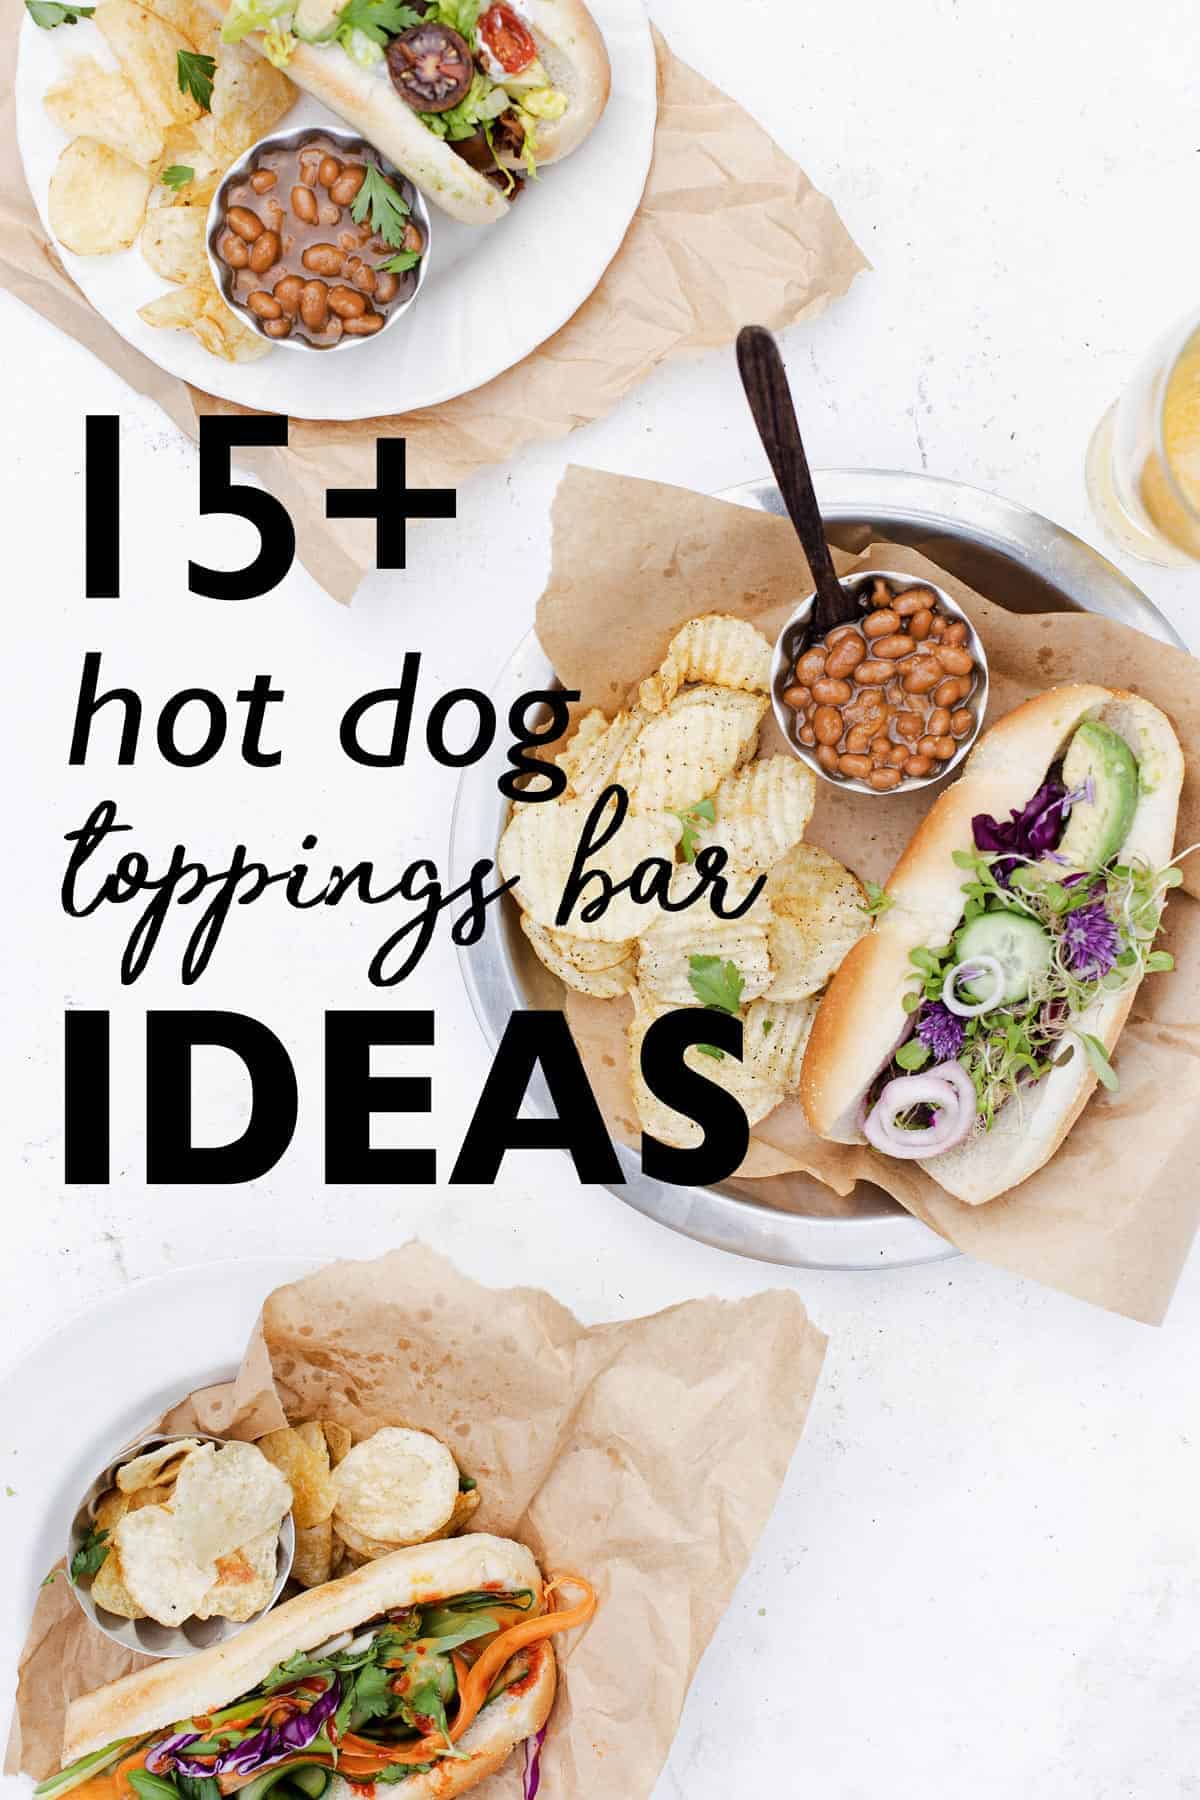 This Ultimate List of Hot Dog Toppings Ideas makes it so easy to throw together an easy hot dog bar food station at your next party! hot dog toppings | hot dog ideas | hot dog bar | gourmet hot dog recipes | hot dog menu ideas